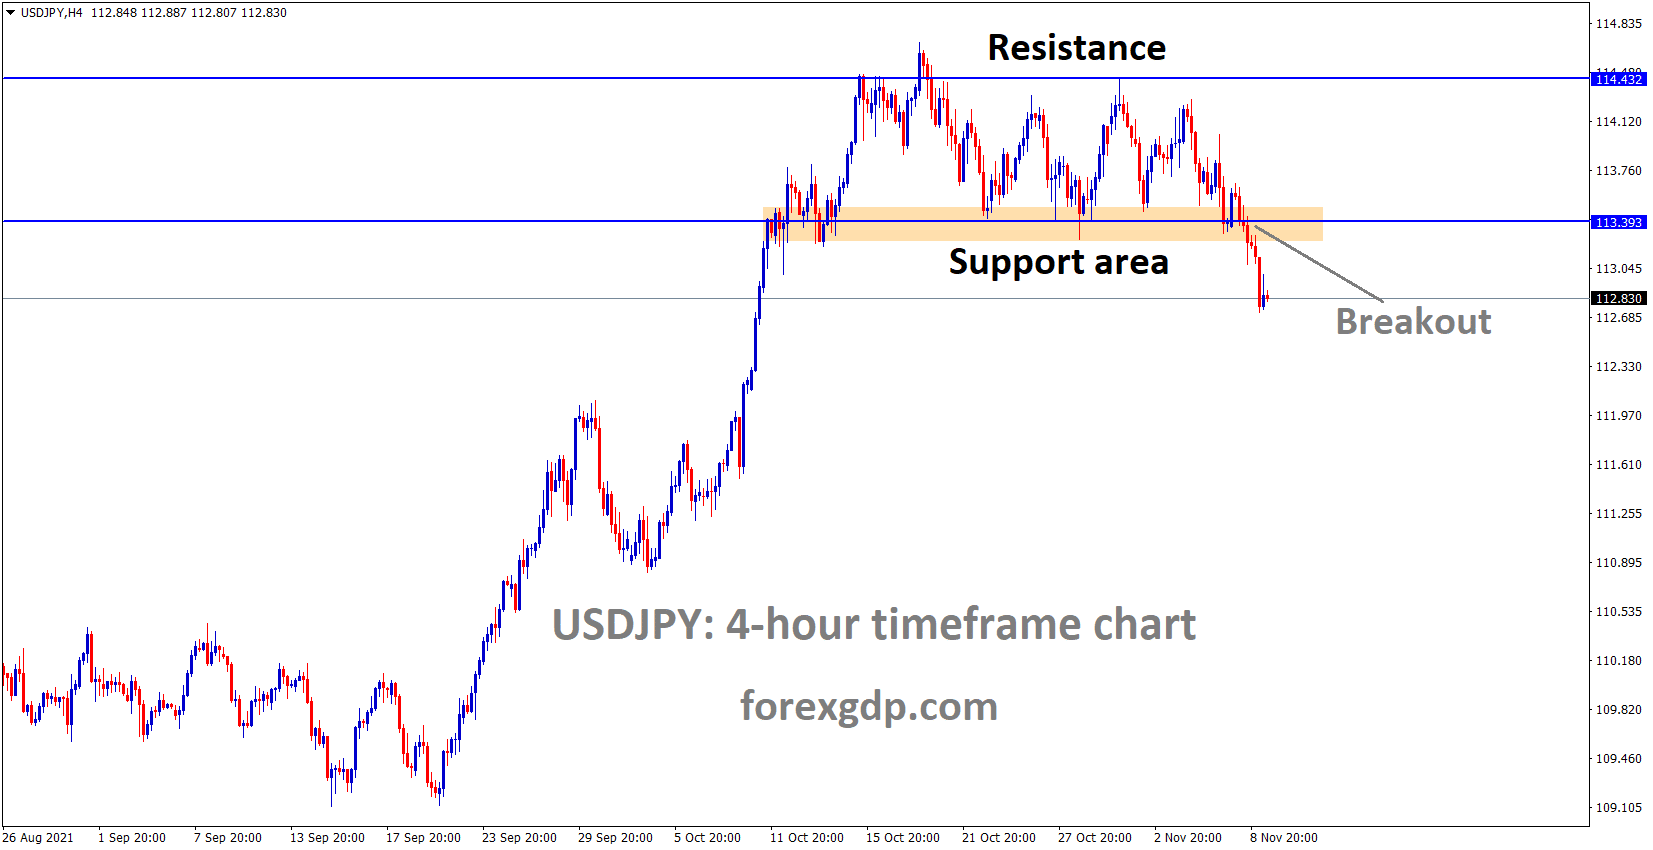 USDJPY had brokeout the consolidation Box pattern after one month